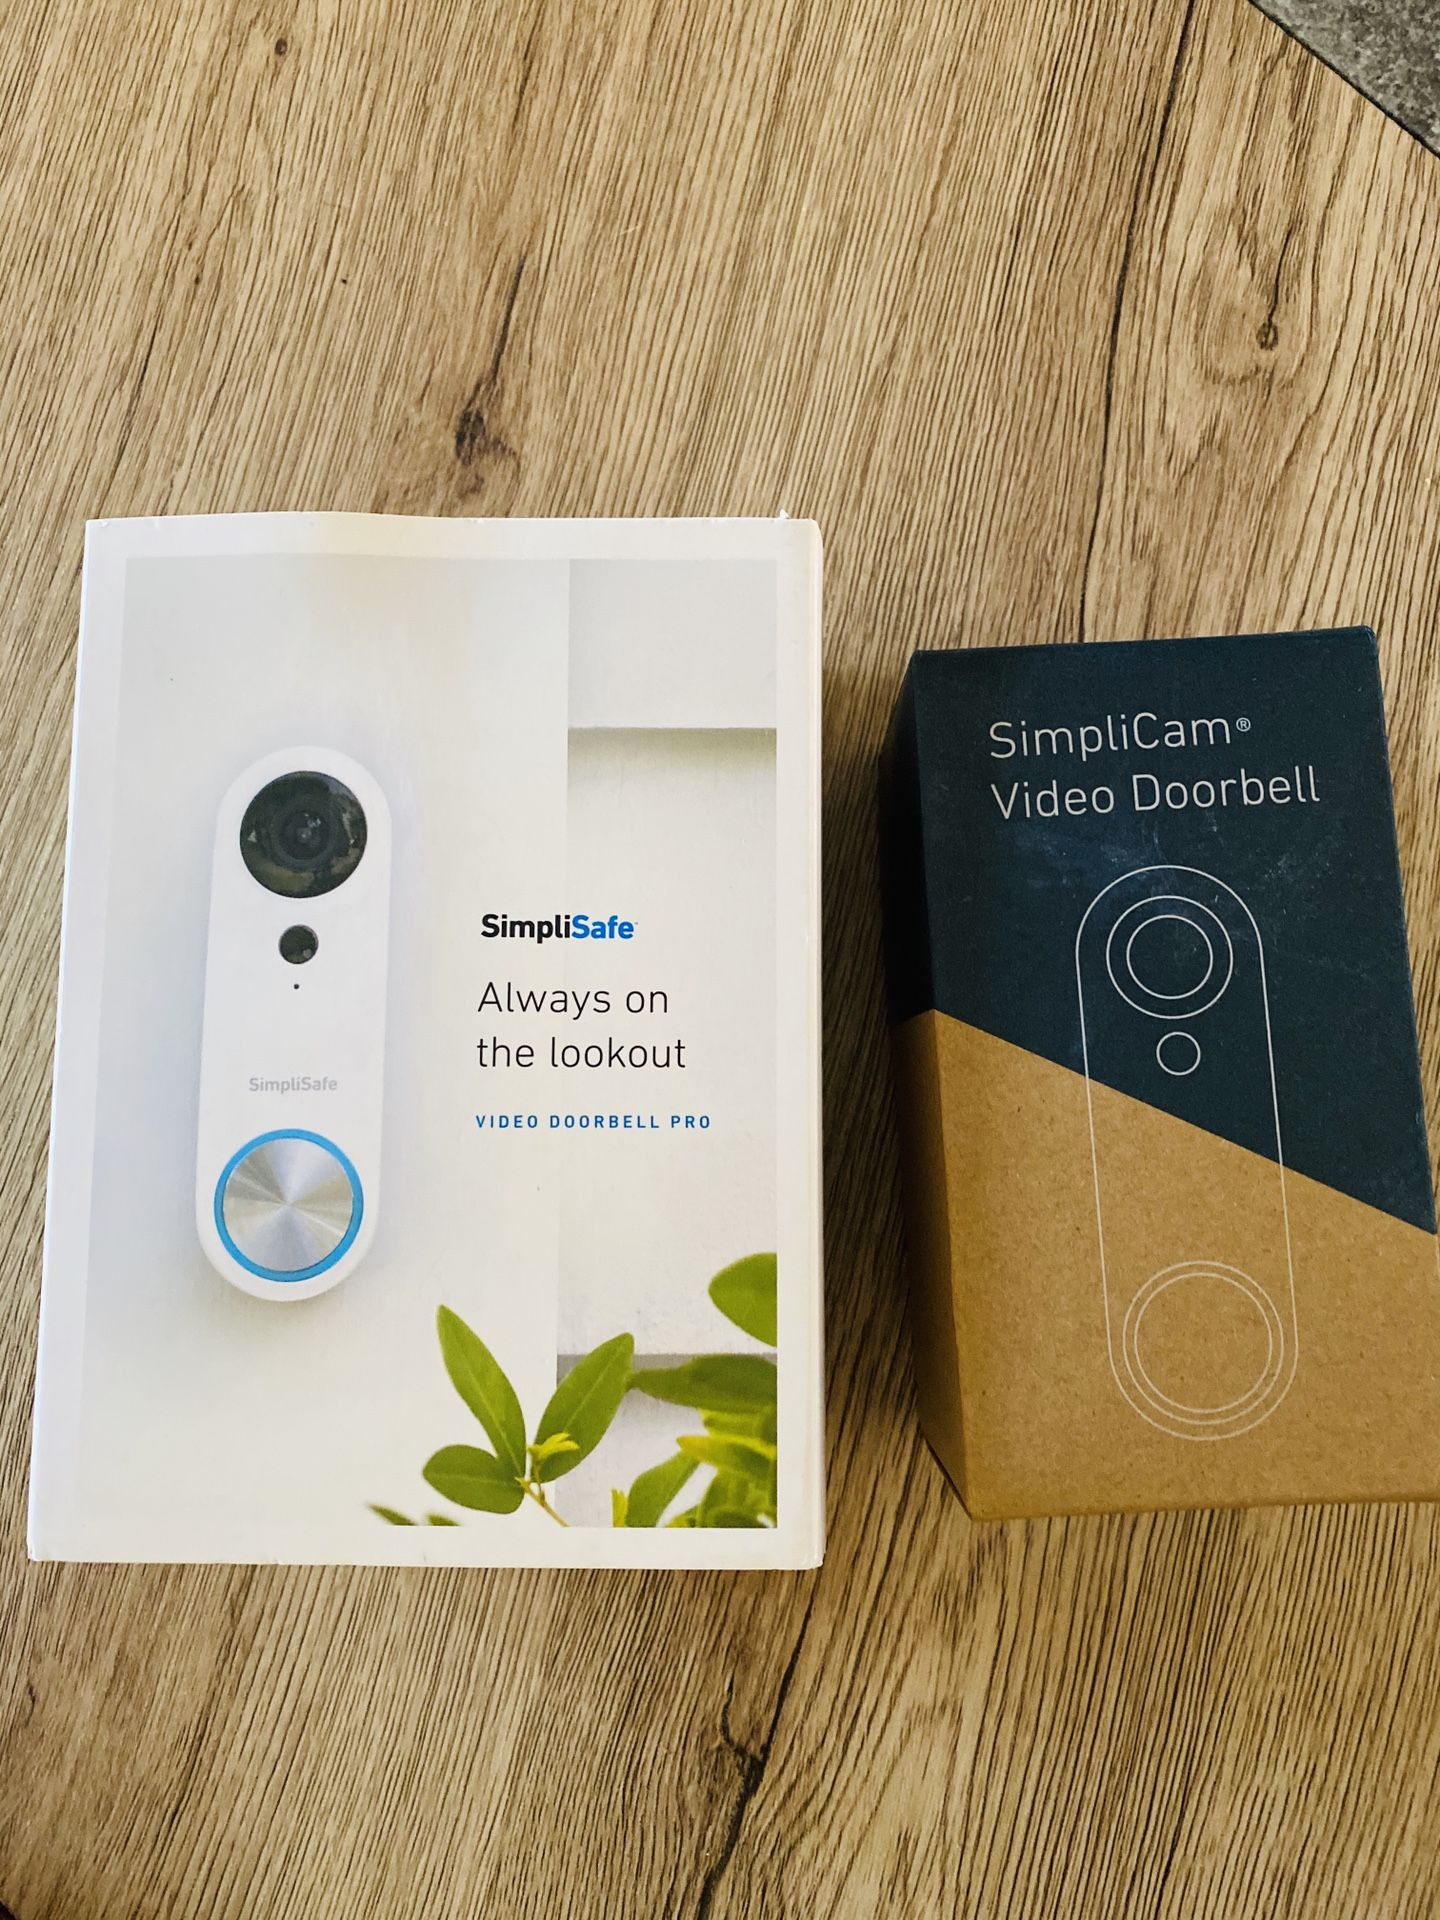 2 SimpliSafe video door bells with all accessories: chime connector, 2 color face plates